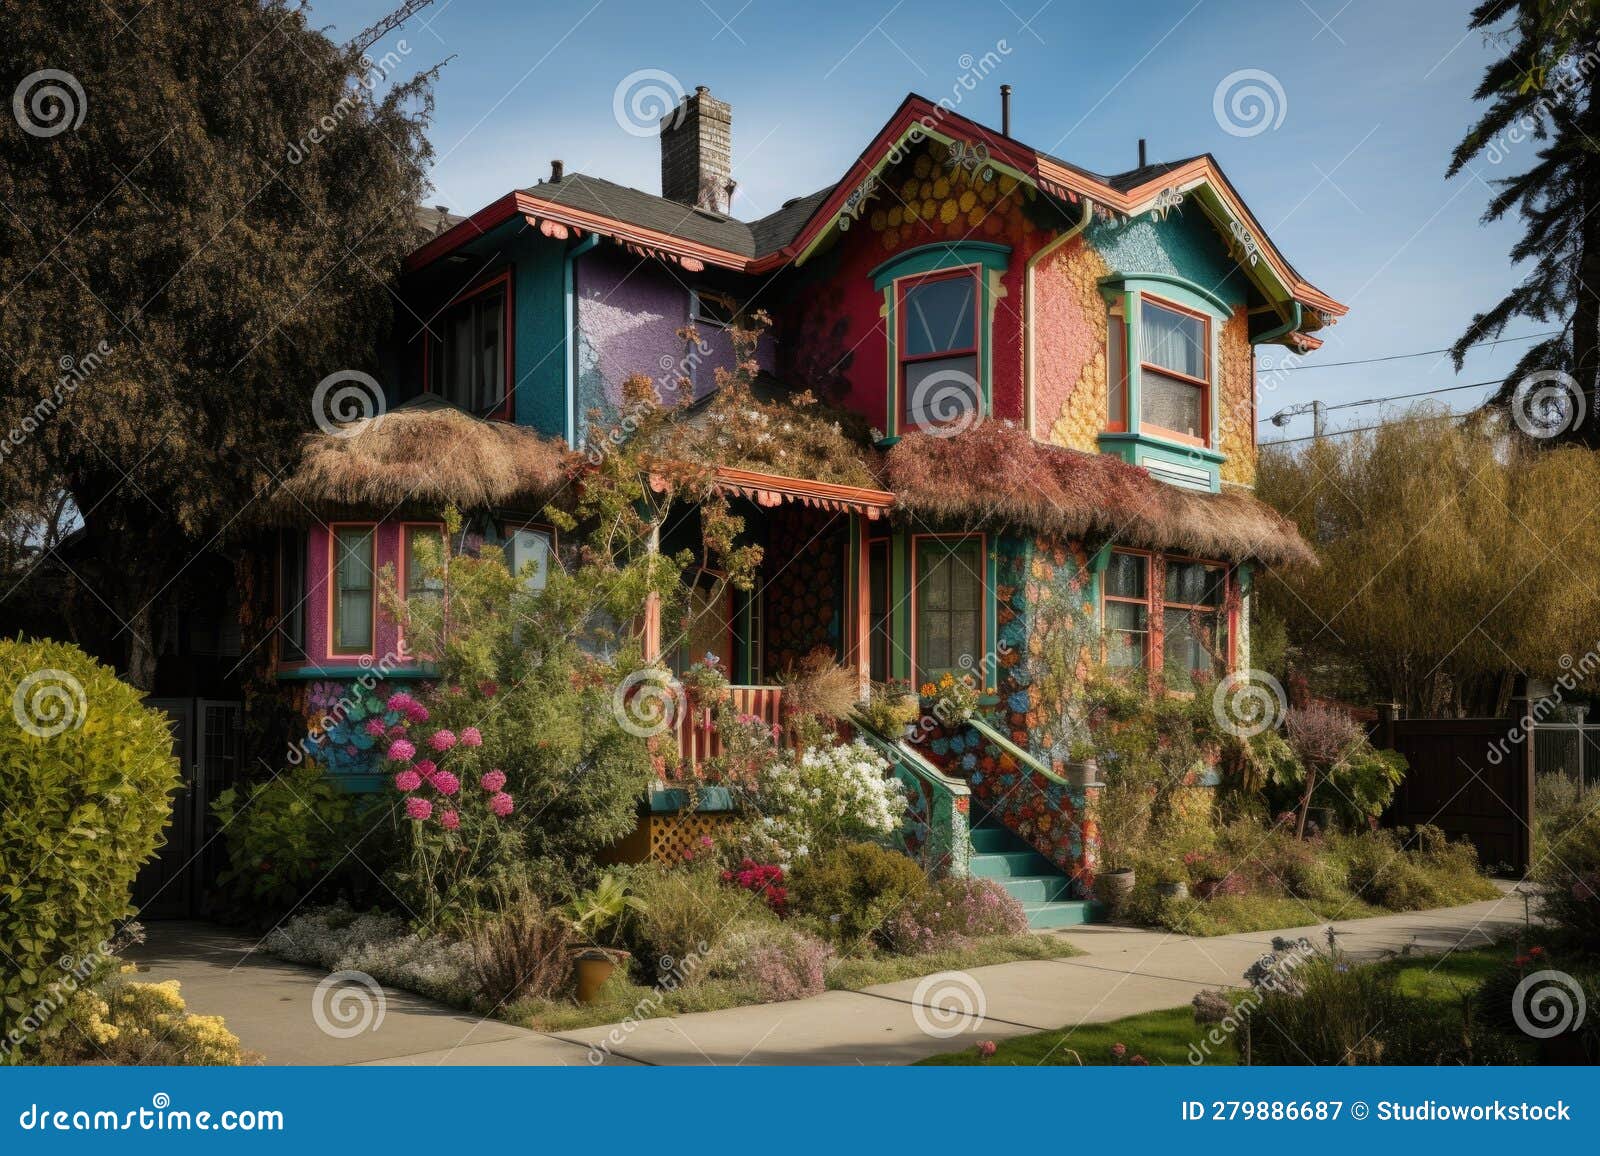 Brightly Painted Home Surrounded by Blooming Gardens, in Residential ...